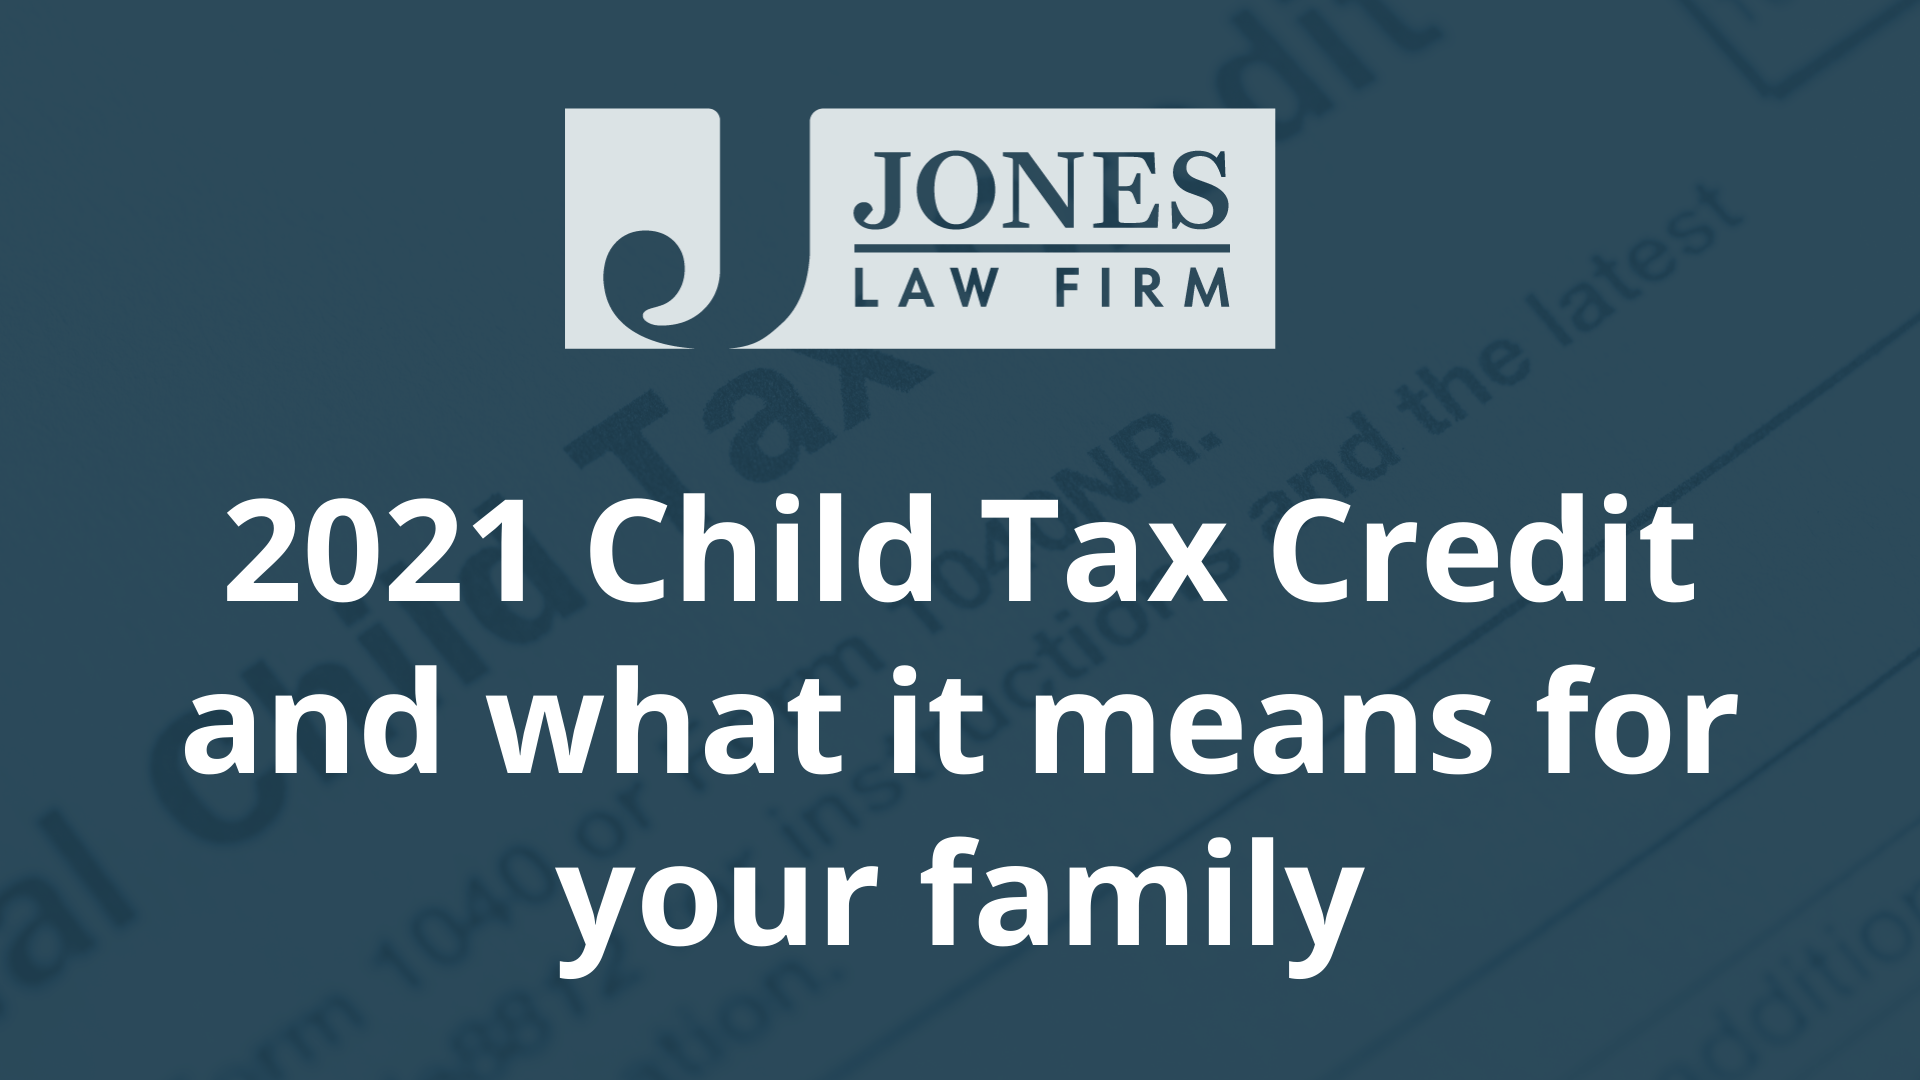 2021 Child Tax Credit and what it means for your family - jones law firm - louisiana